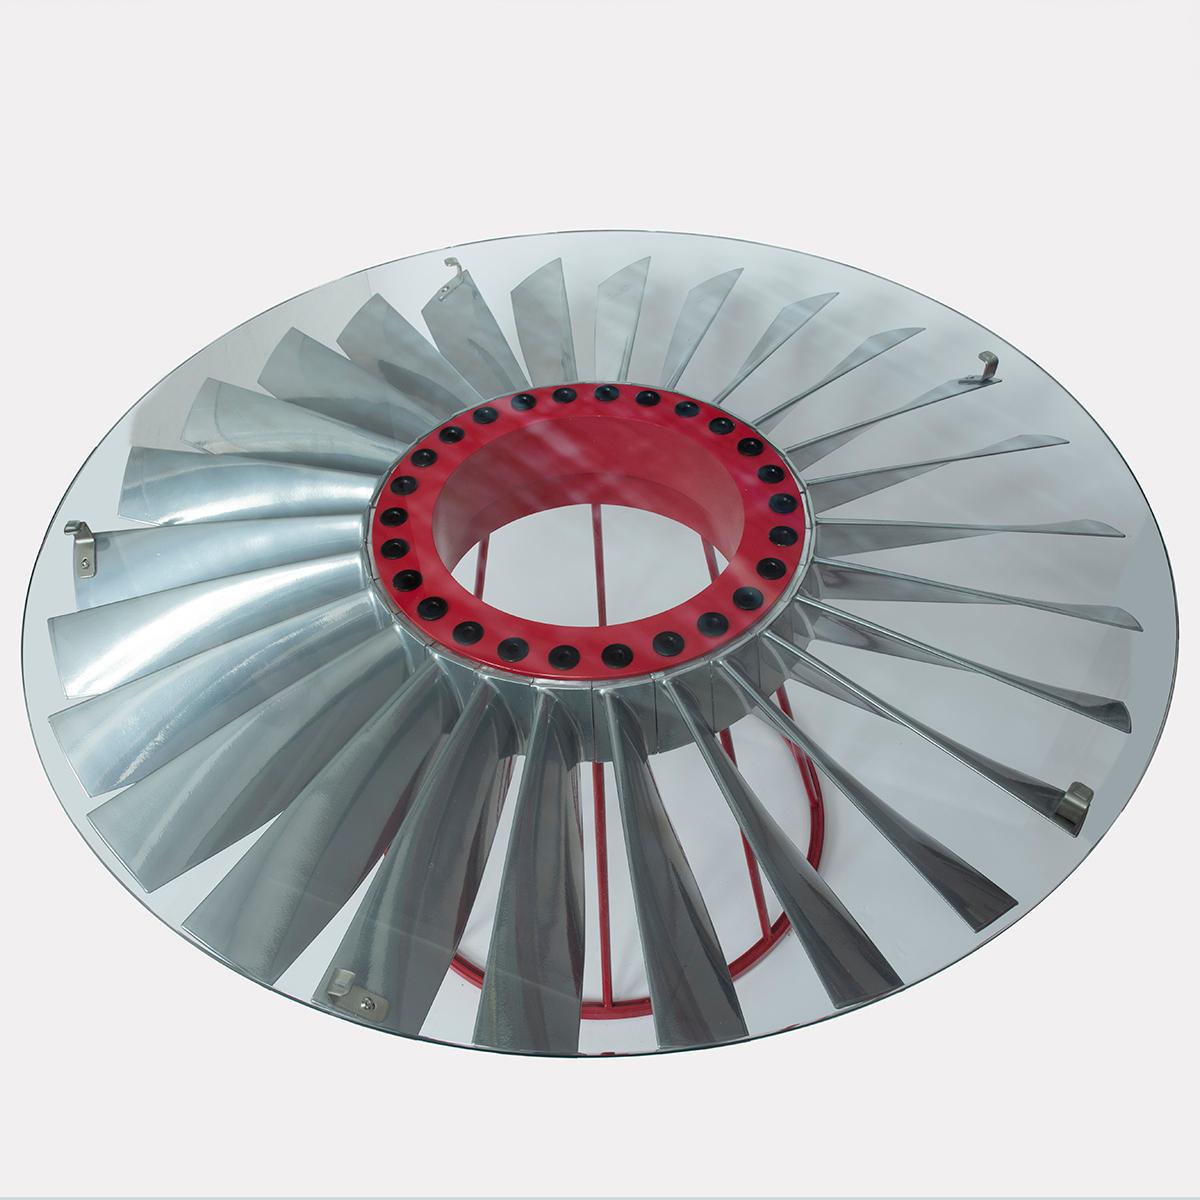 The base of our stunning coffee table is a chrome polished with RAF red painted central hub, fan blade from a Spey, Rolls Royce jet engine. This jet component would originally have been an integral part of a Spey engine which was widely and reliably